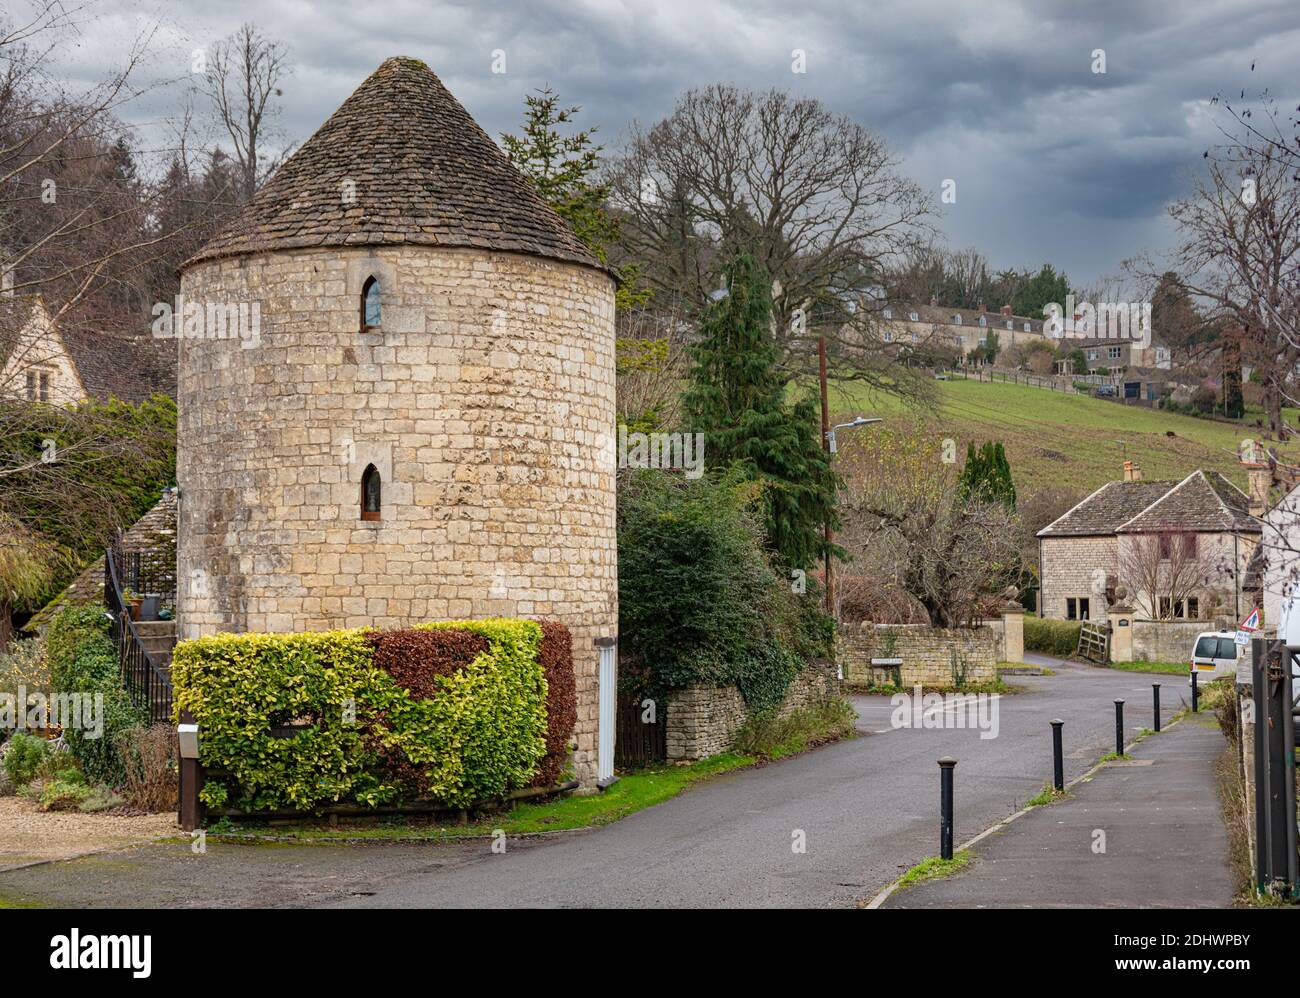 View of the Gloucester village of South Woodchester in the Nailsworth Valley, Nailsworth, England Stock Photo